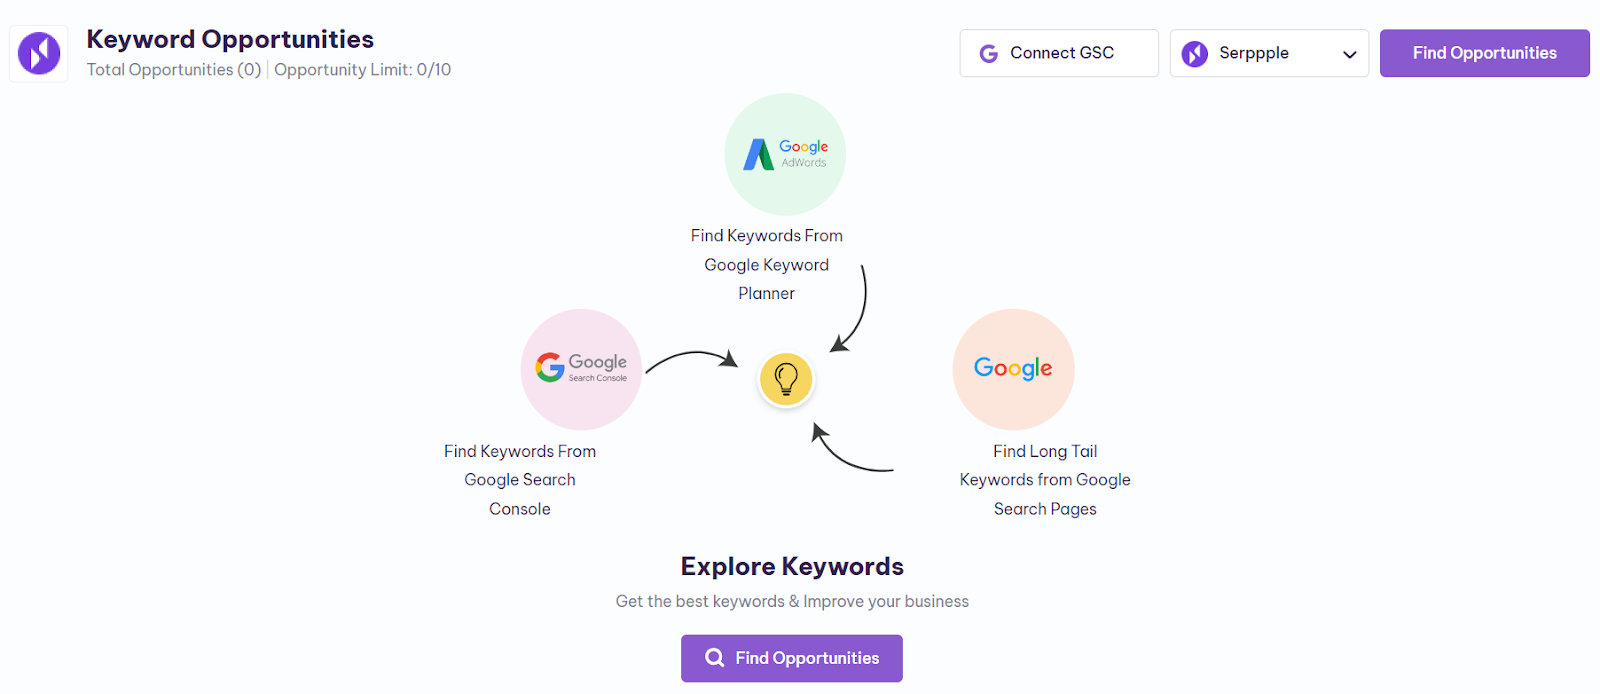 how to find new keyword opportunities on serpple